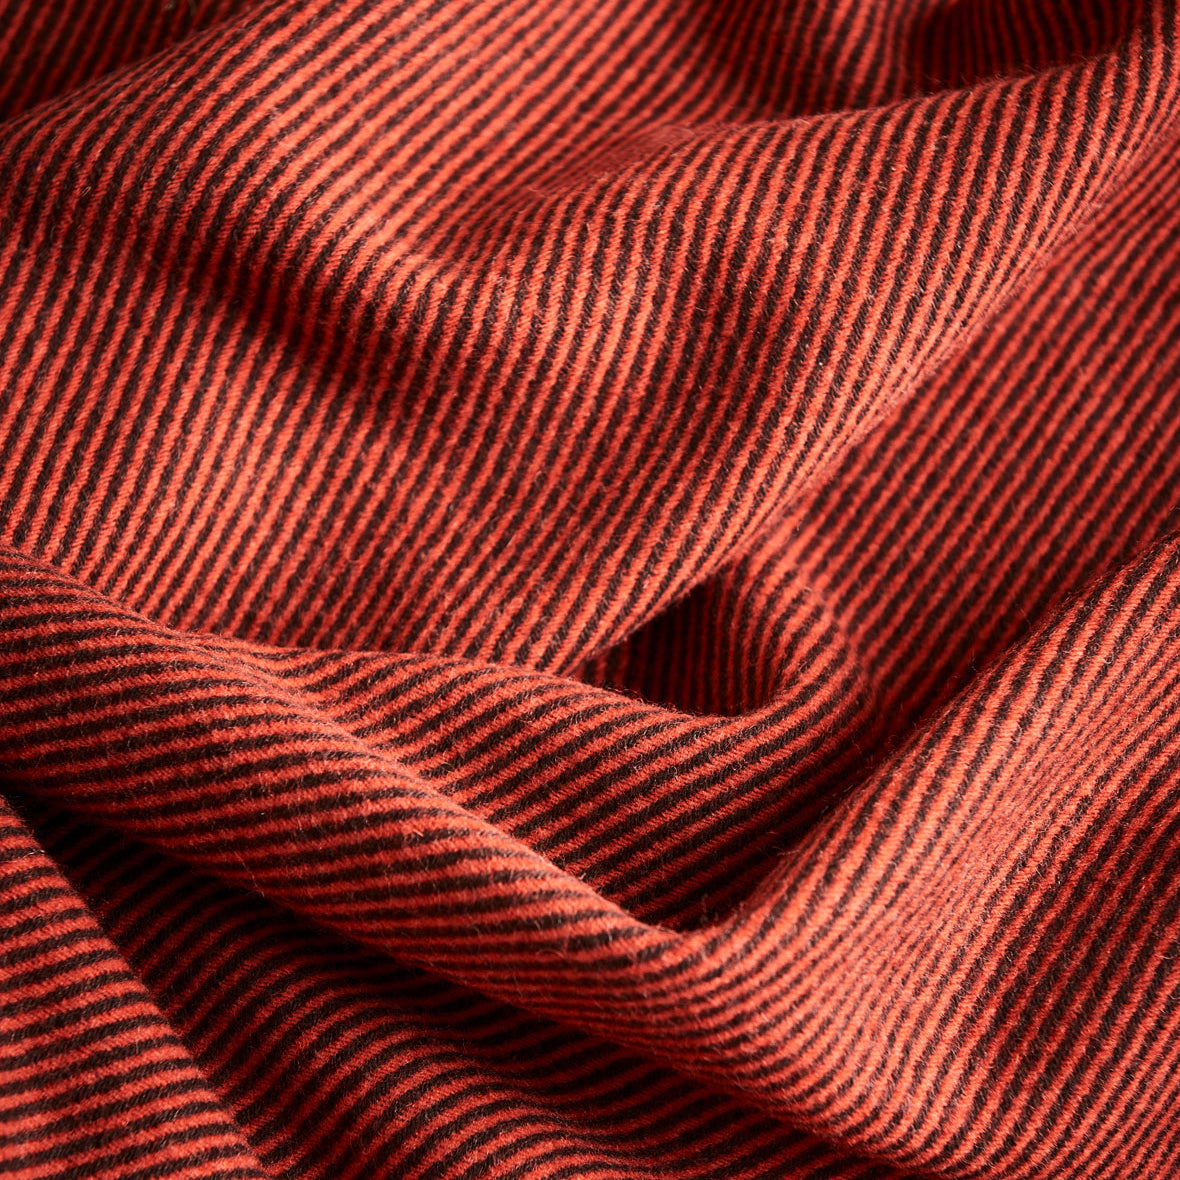 A close up of a diagonal throw in umber showing the drape of the fabric.